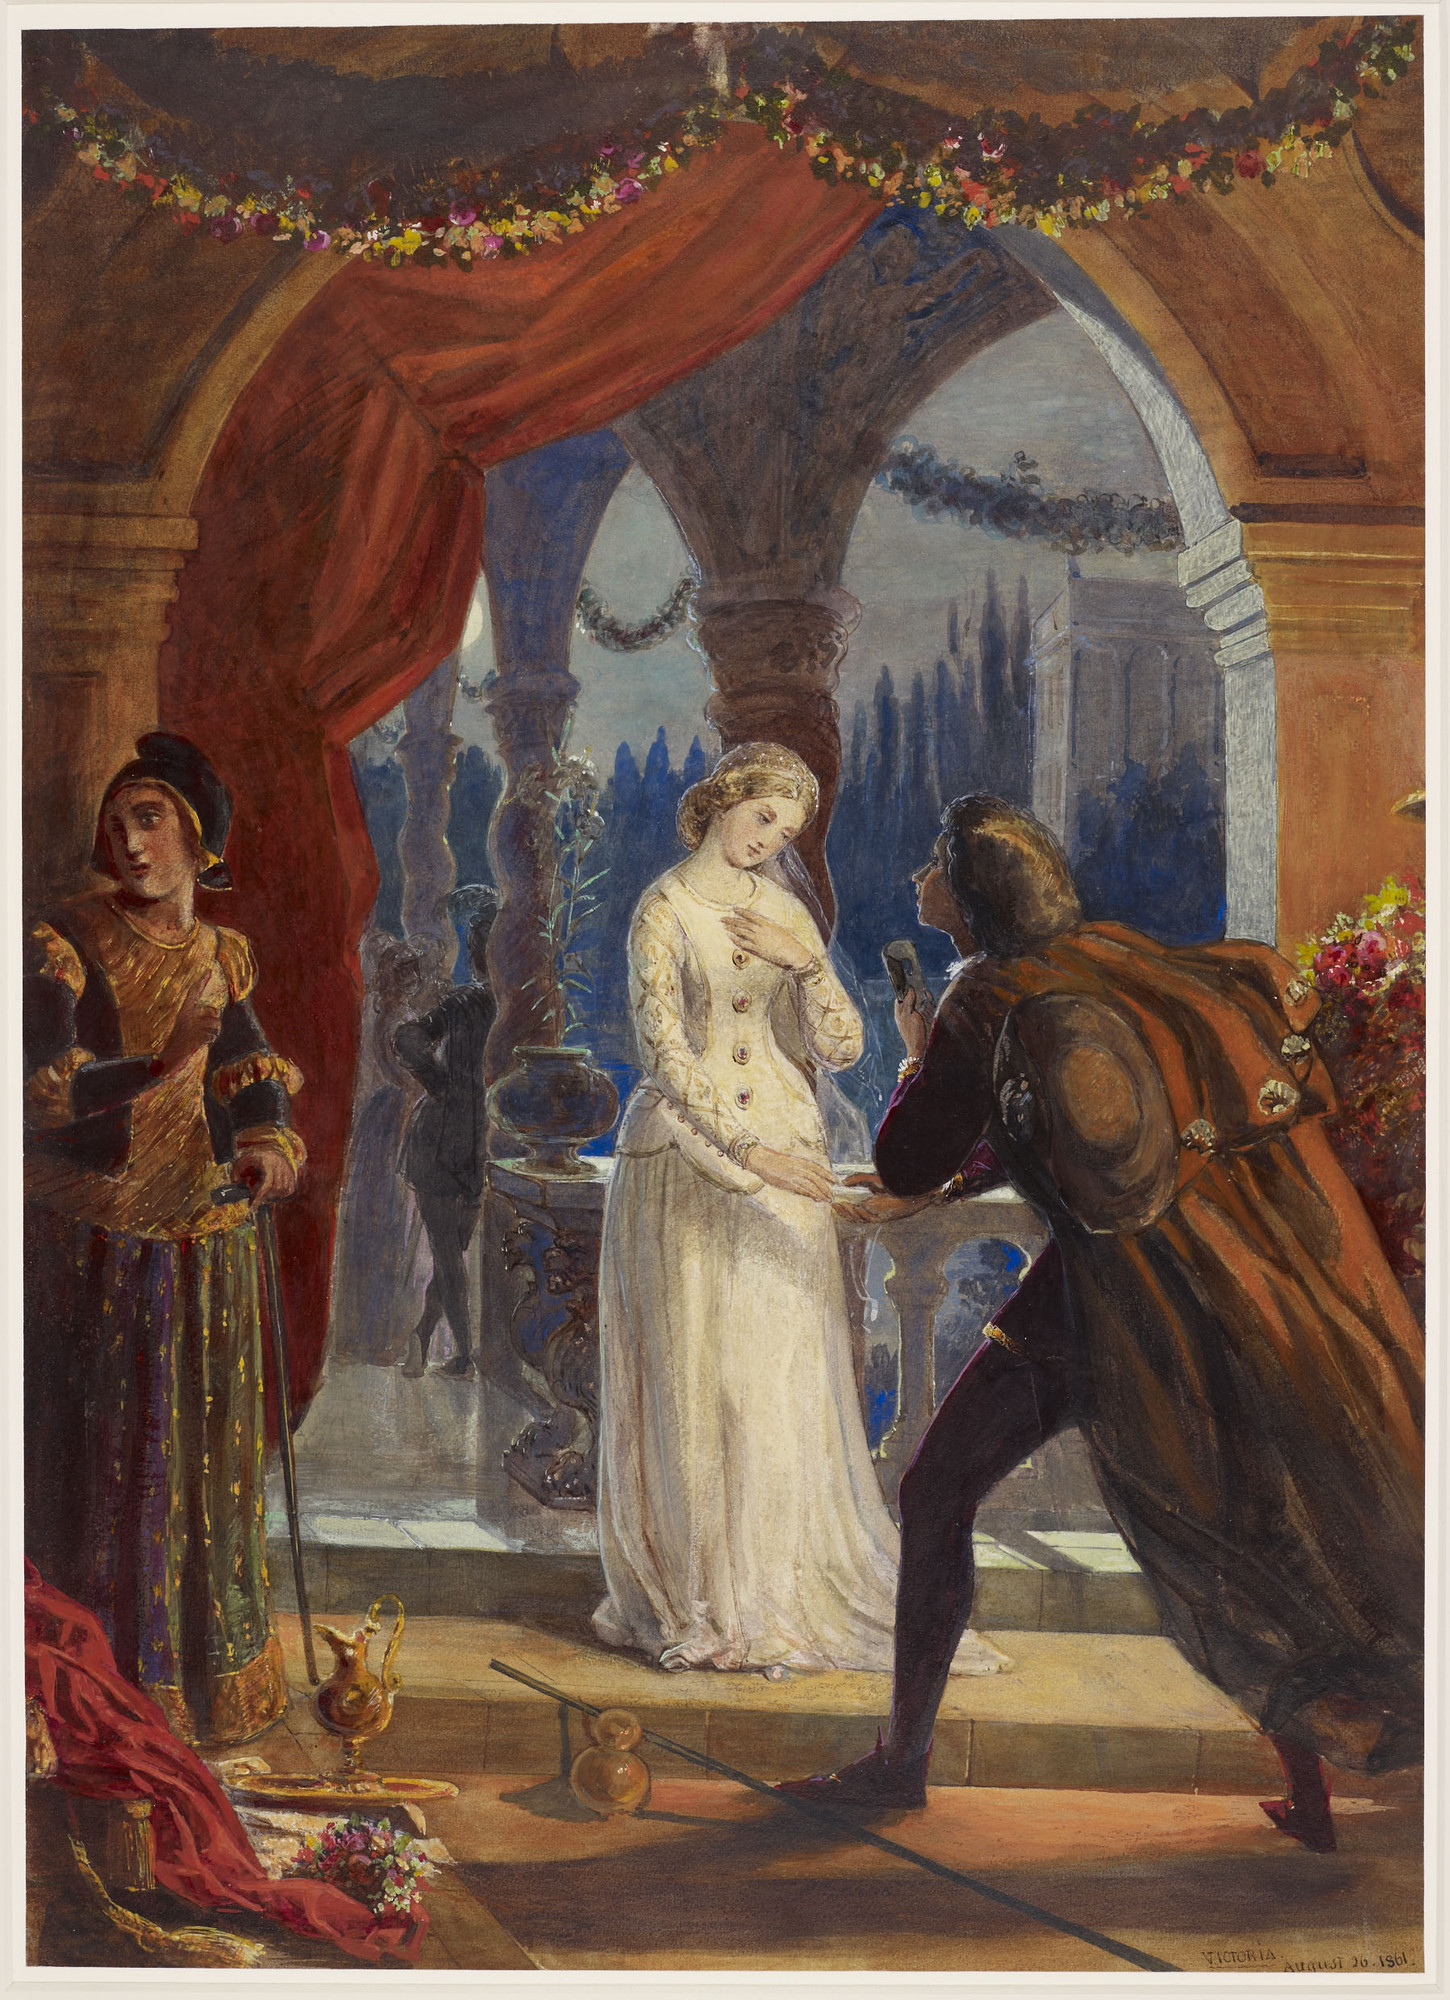 A watercolour showing the first meeting of Romeo and Juliet. Juliet is shown standing&nbsp;in the centre,&nbsp;full-length and facing right, beneath an arch. Romeo is standing in front of her, reaching out to take her hand. His hat is falling off and he h